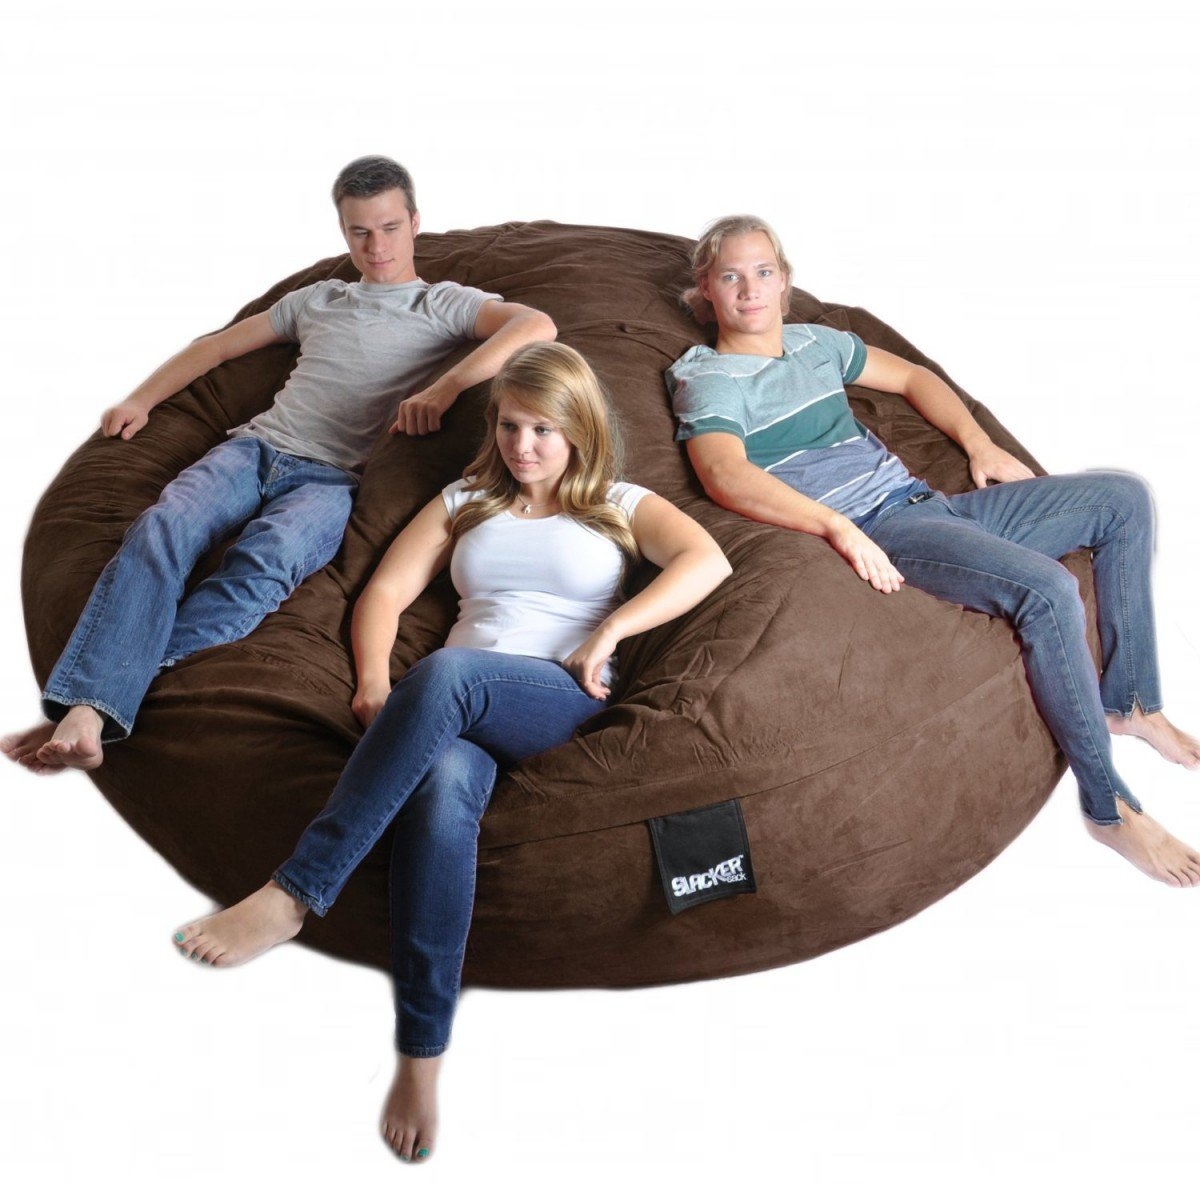 Cotton, Beige Giant Bean Bag Chair XXL Indoor and Outdoor living room balcony garden bean bag 400L giant beanbag seat cushion chair for children & adults 180 x 140cm